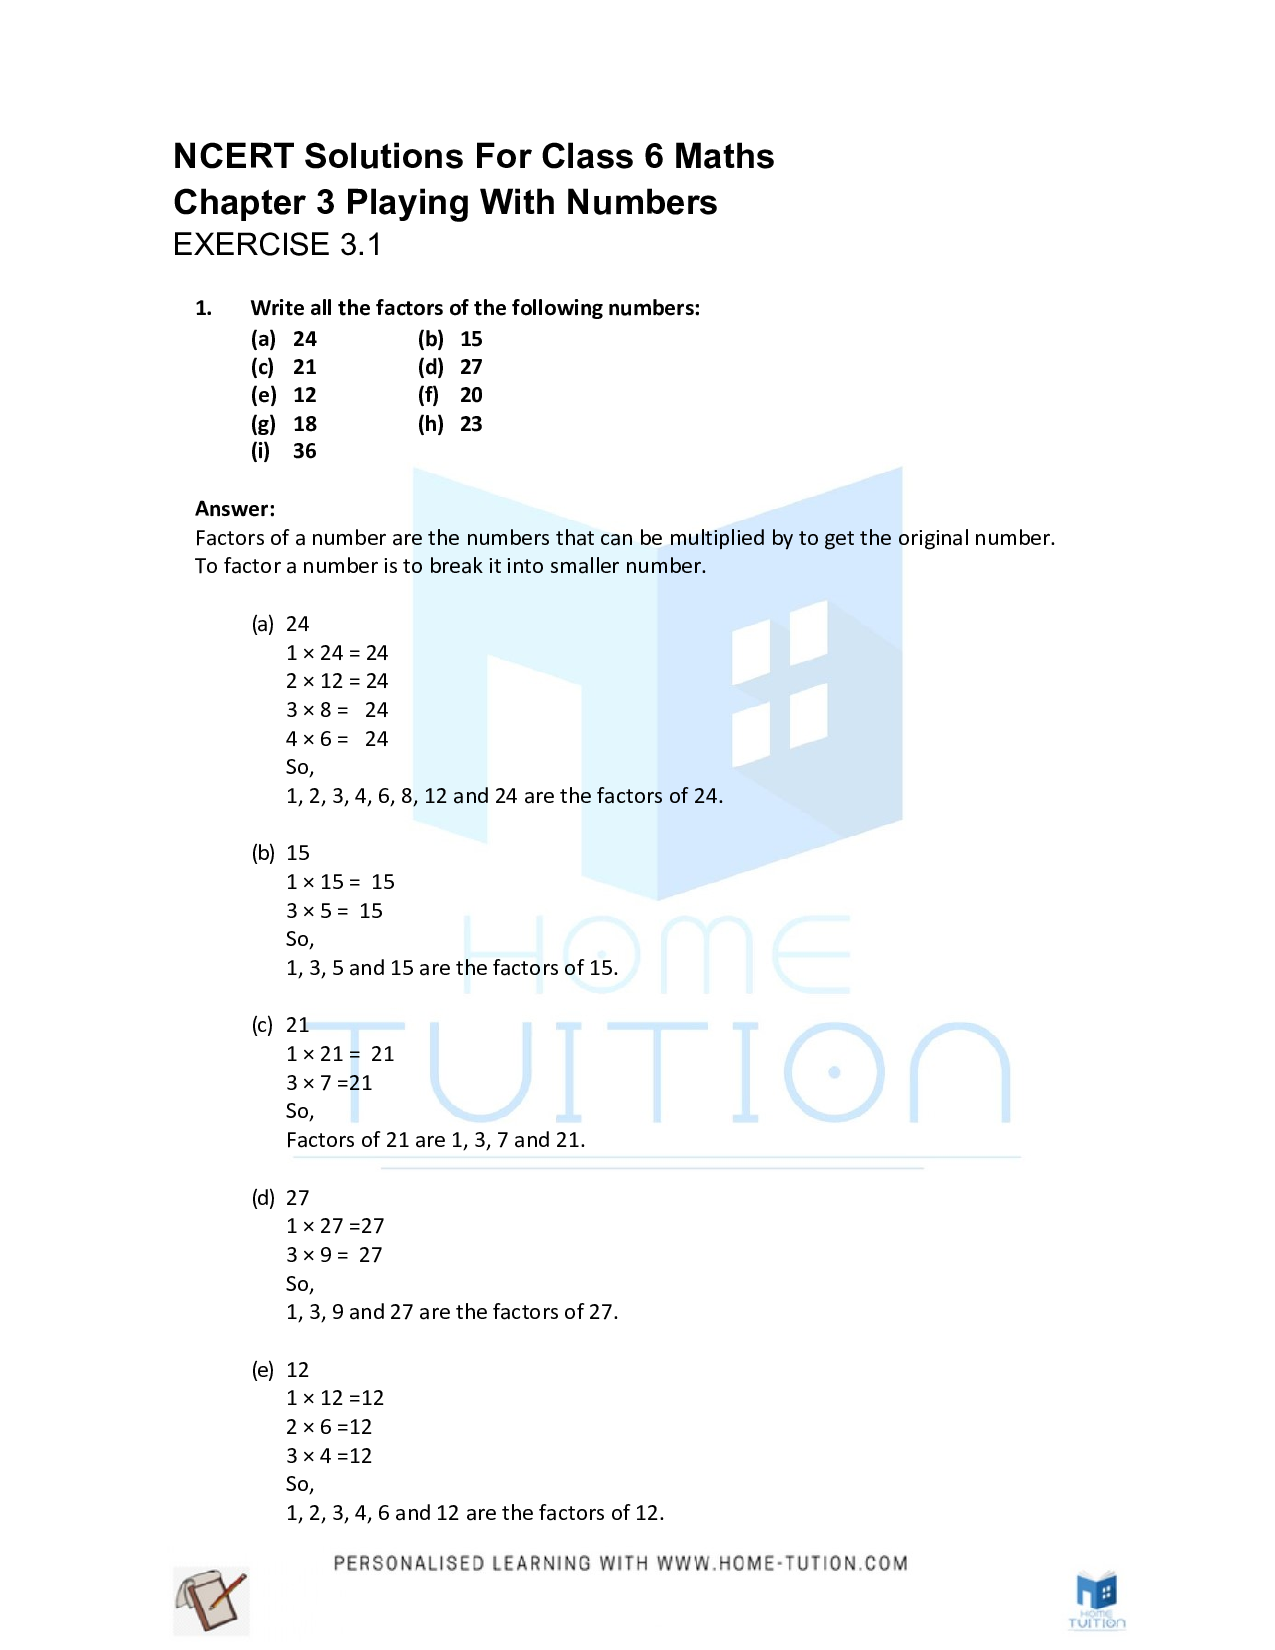 Class 6 Maths Chapter 3 Playing with Numbers